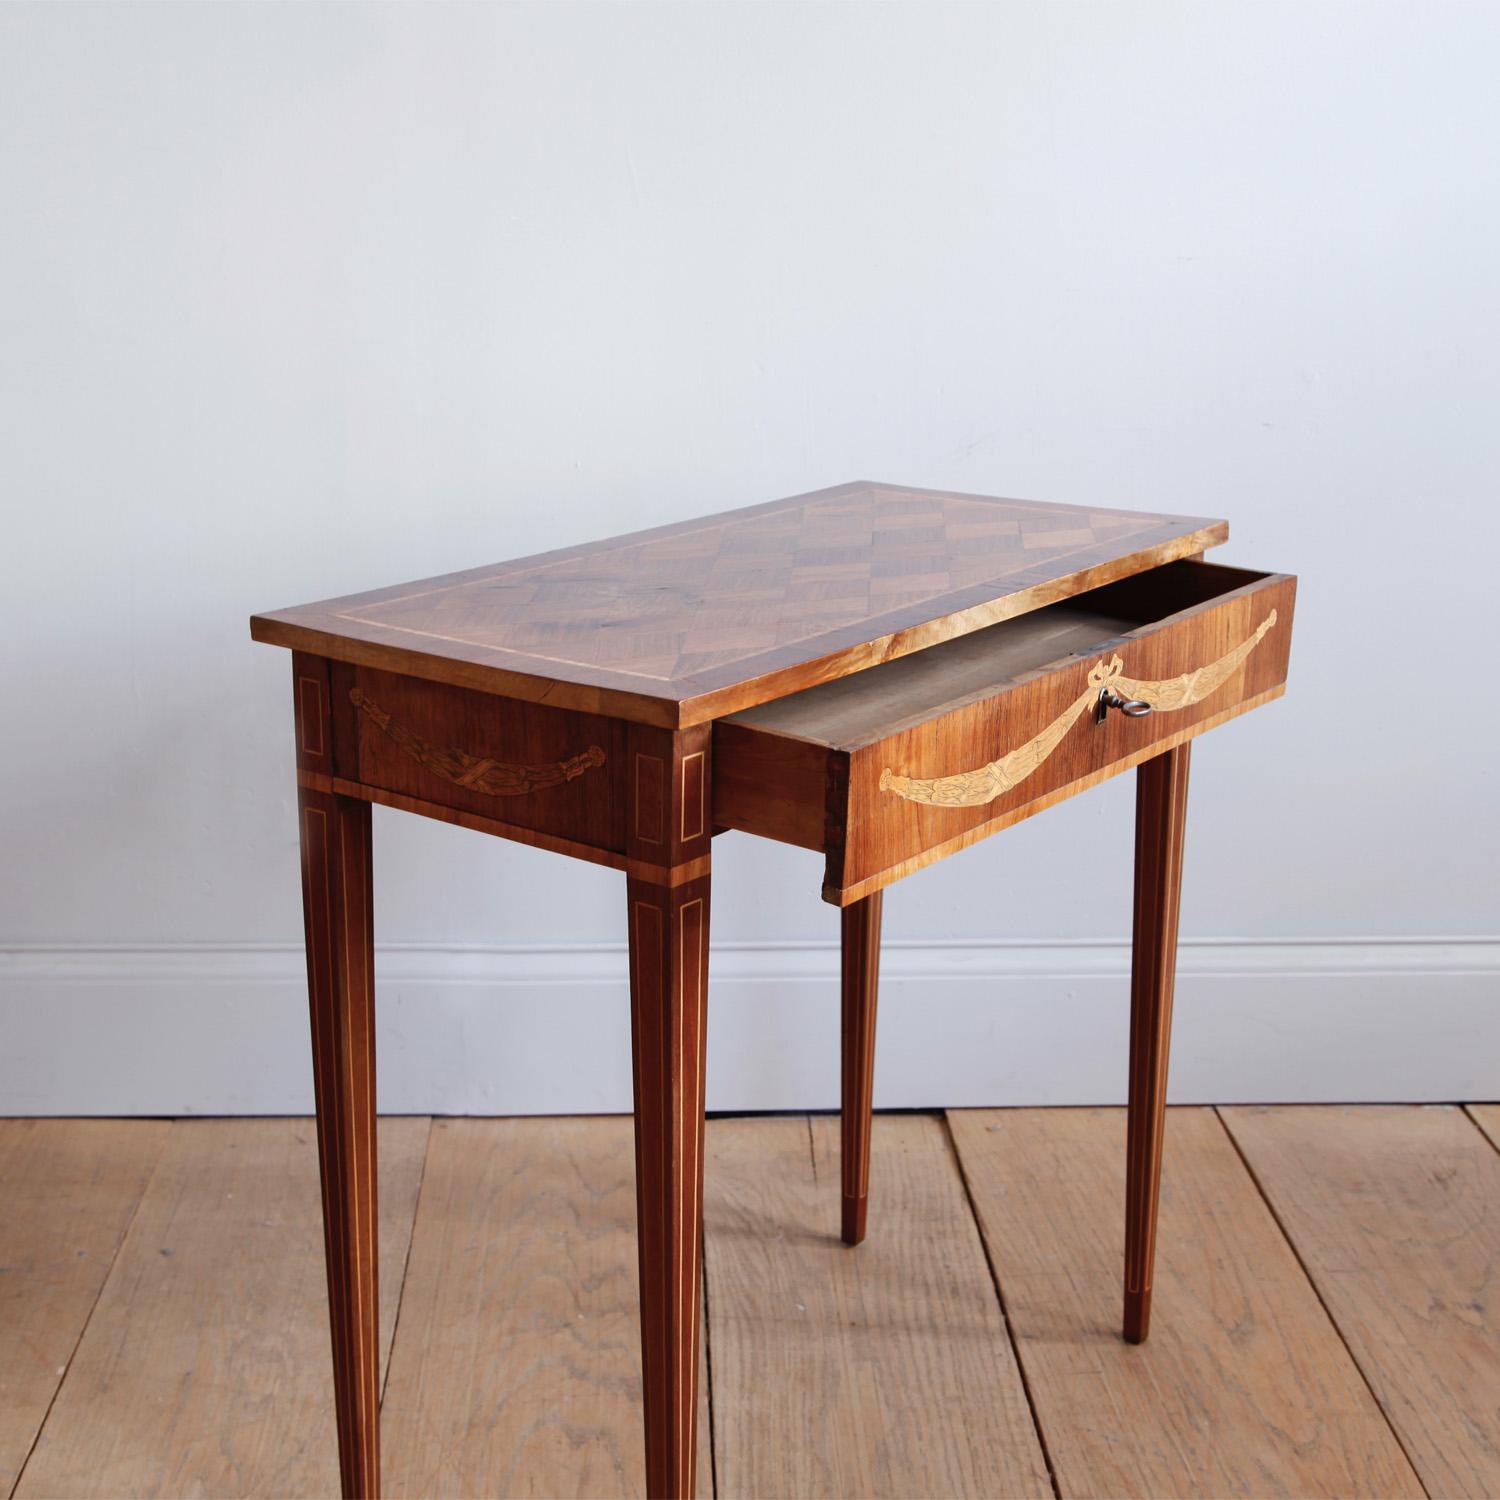 Late 18th Century Swedish Gustavian Occasional Table with Fruitwood Inlay For Sale 3